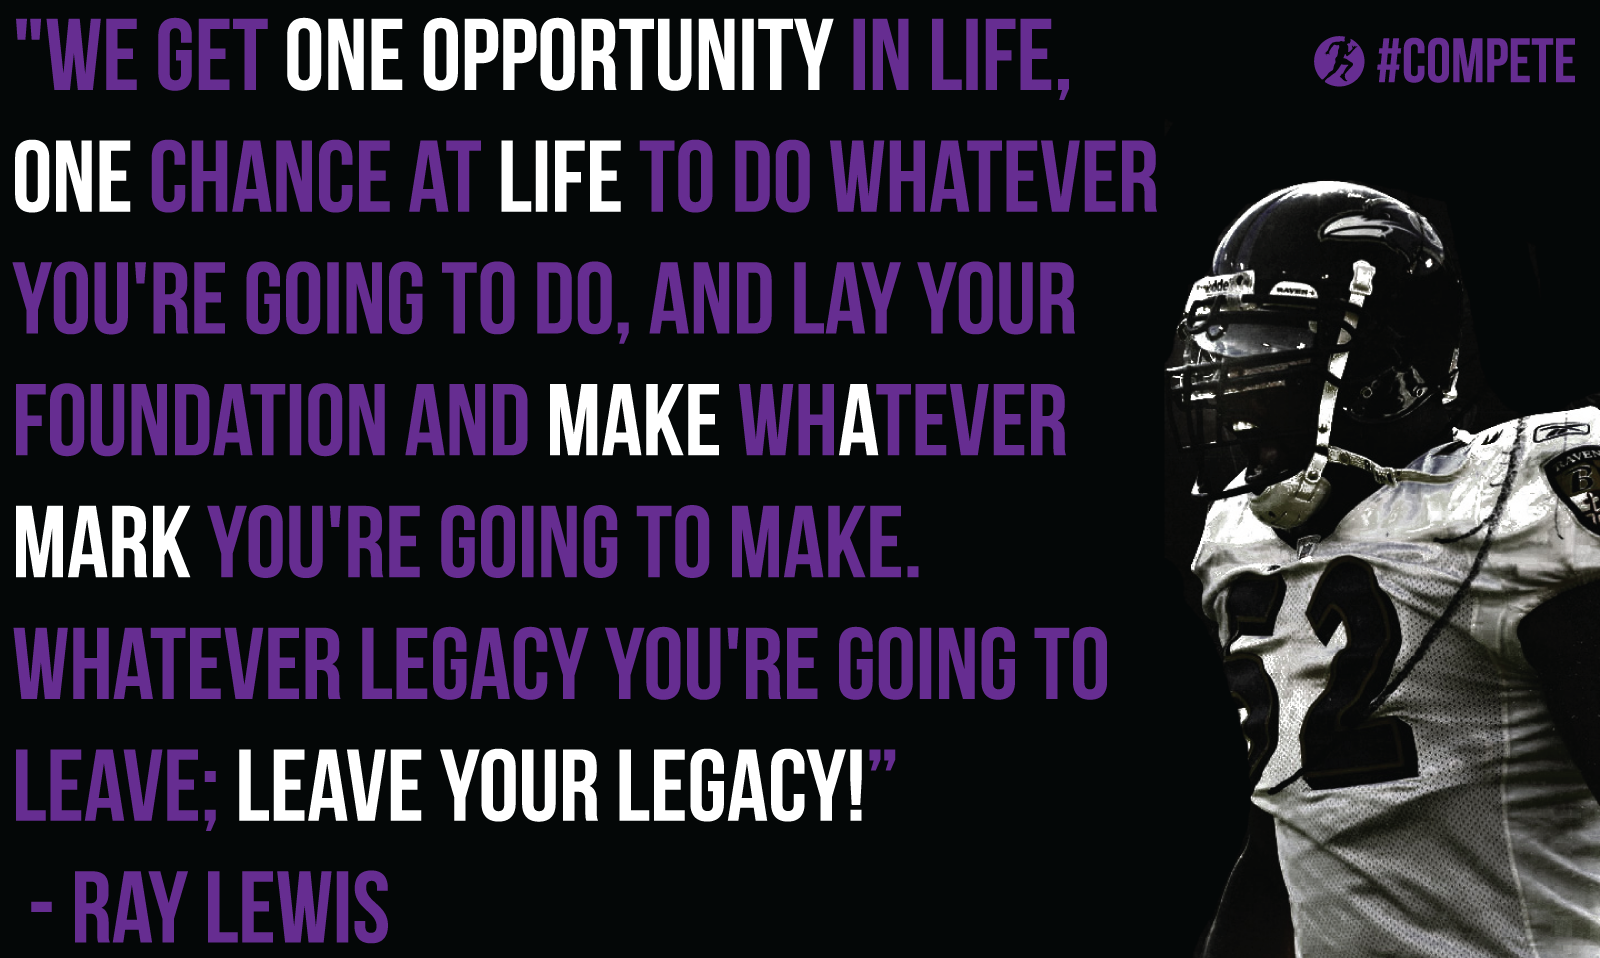 ray-lewis-quote.png